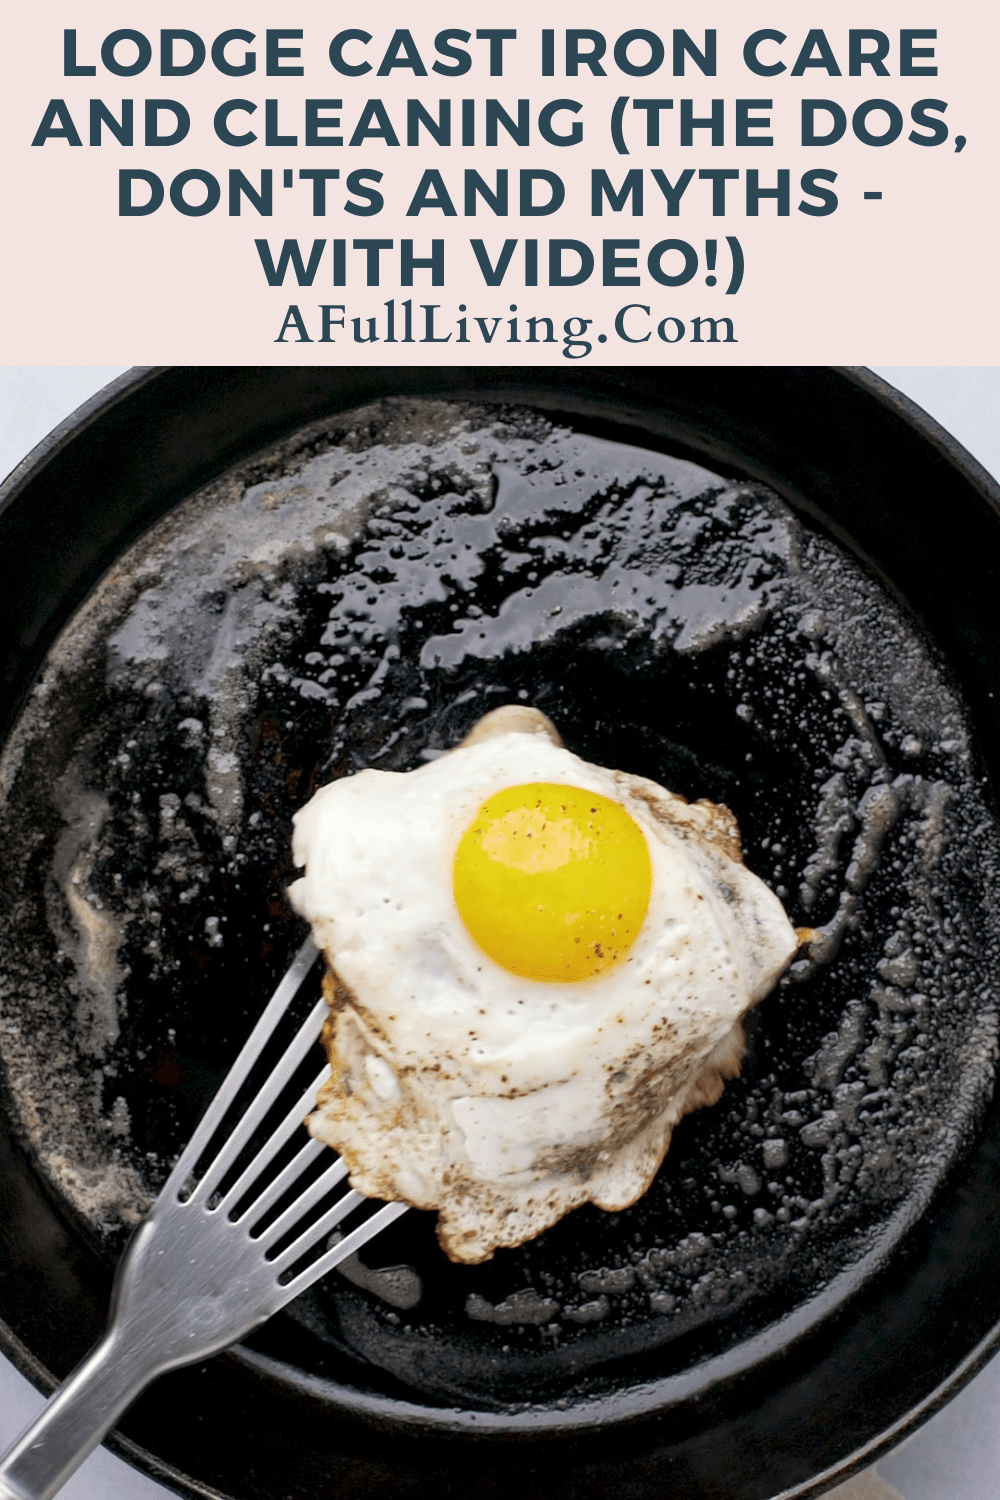 https://afullliving.com/wp-content/uploads/2021/03/Lodge-Cast-Iron-Care-and-Cleaning-The-Dos-Donts-and-Myths-With-Video-NEW.png